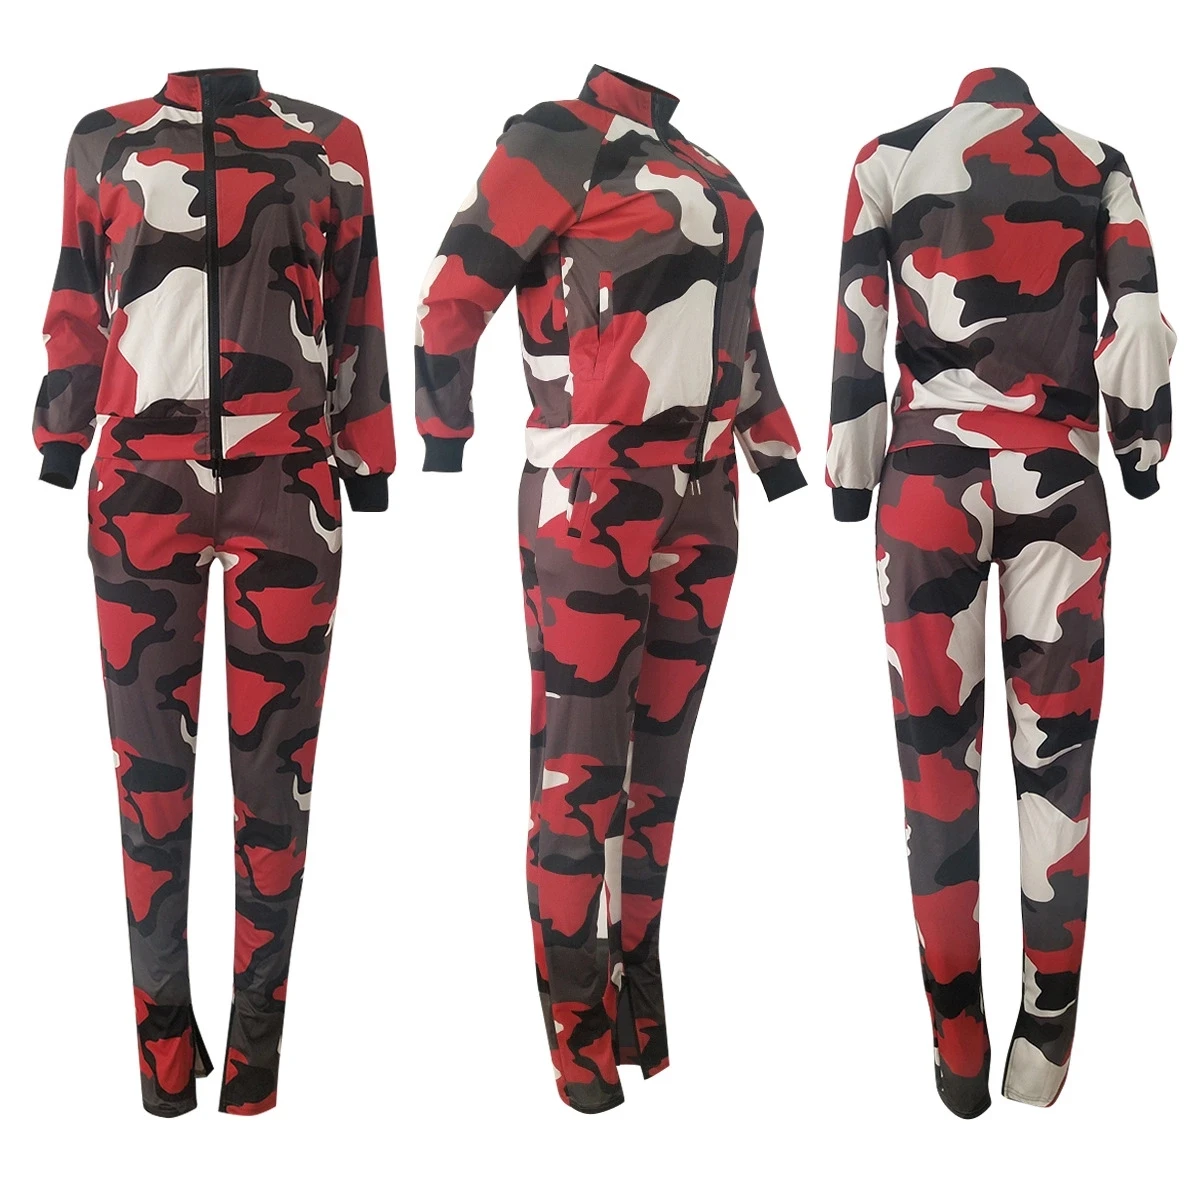 Fm-als151 Hot Style Fashion Camouflage With Pocket 4 Colors Casual ...